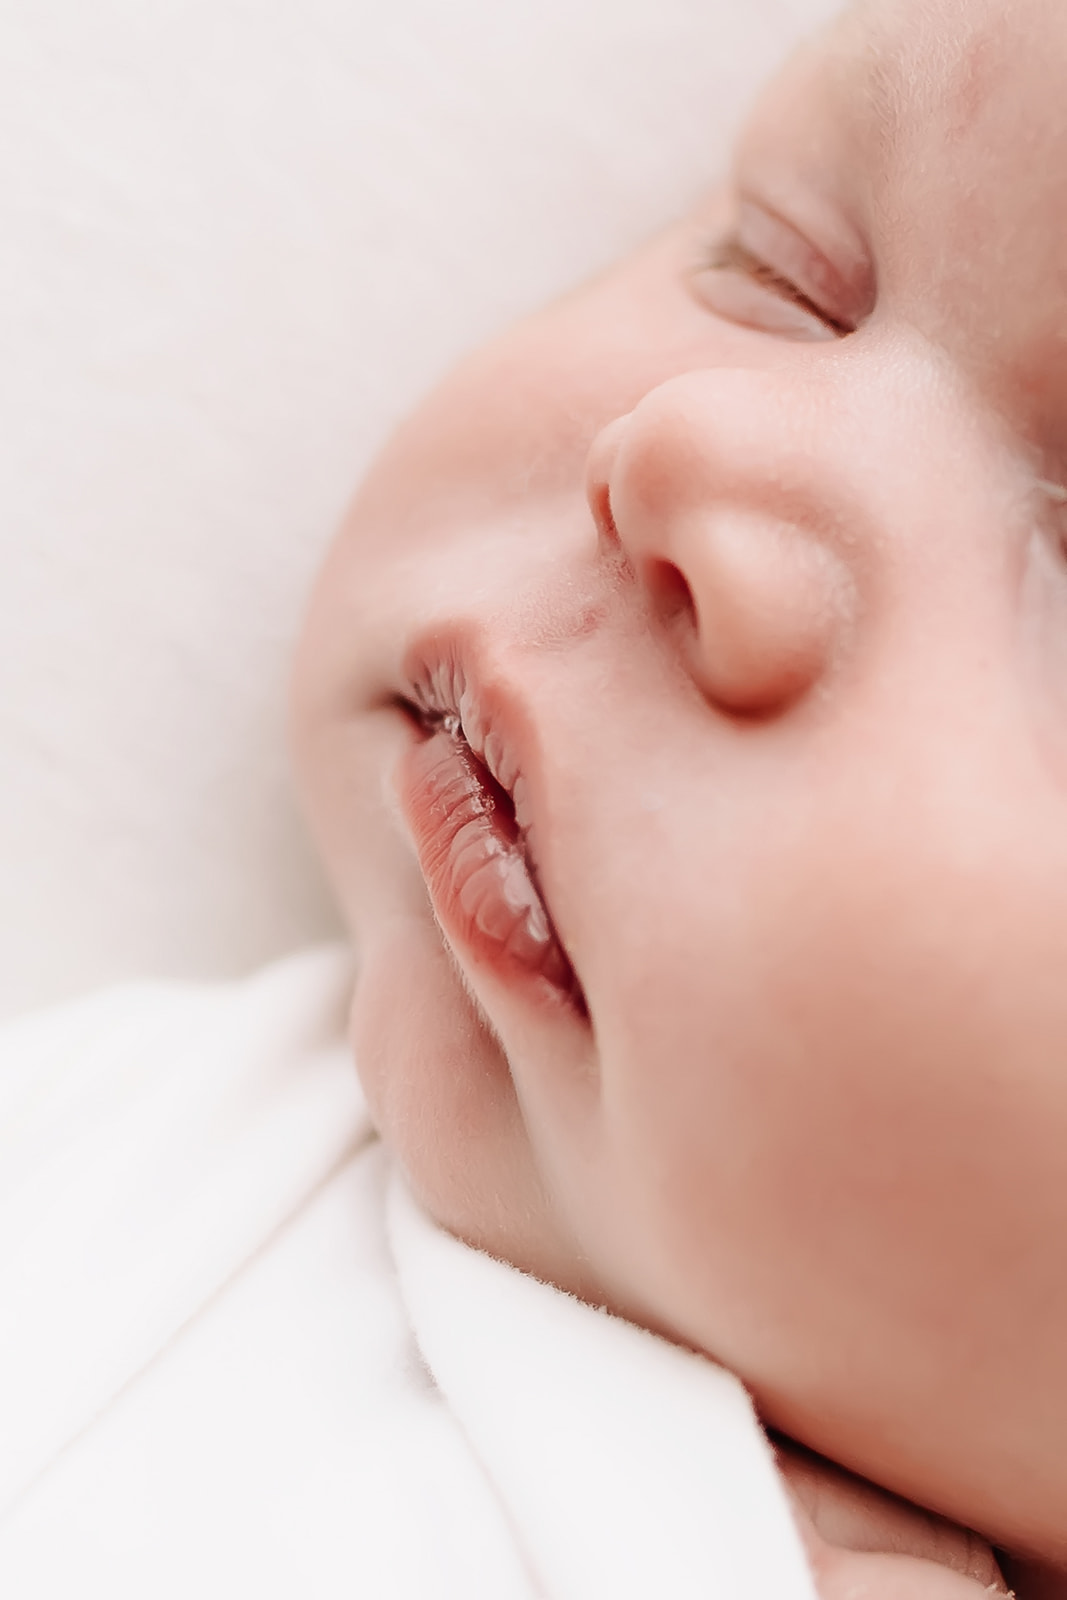 Details of a newborn baby face